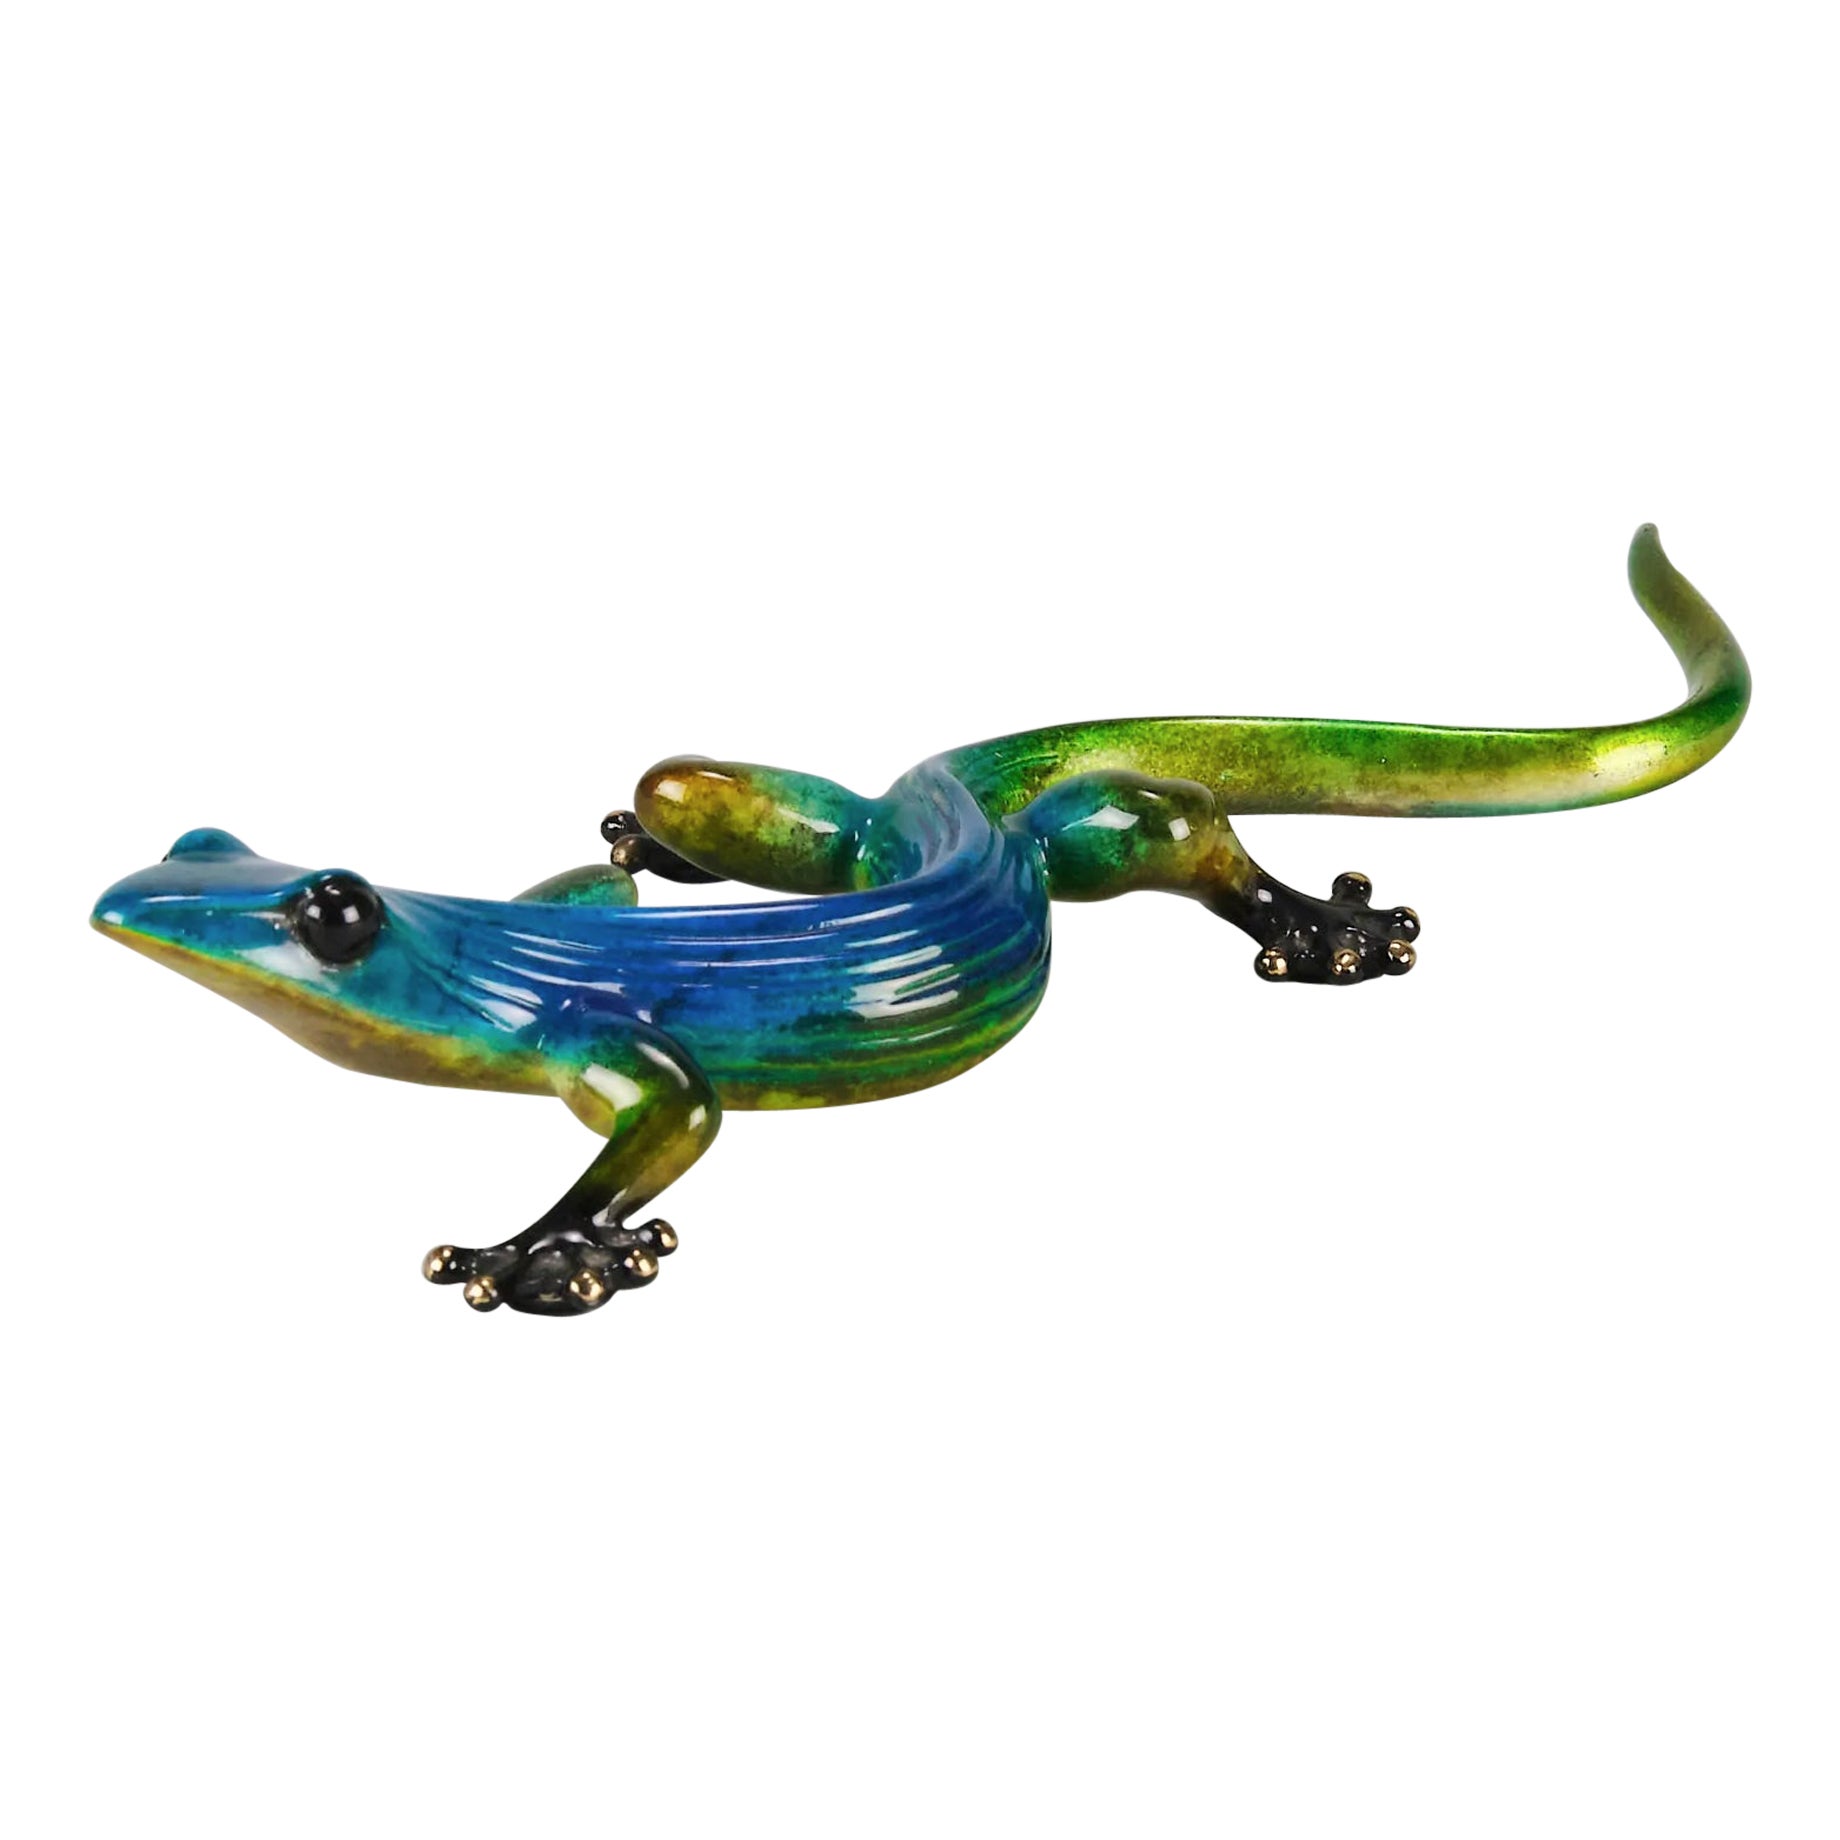 Limited Edition Bronze Entitled "Margarita Gecko" by Tim Cotterill